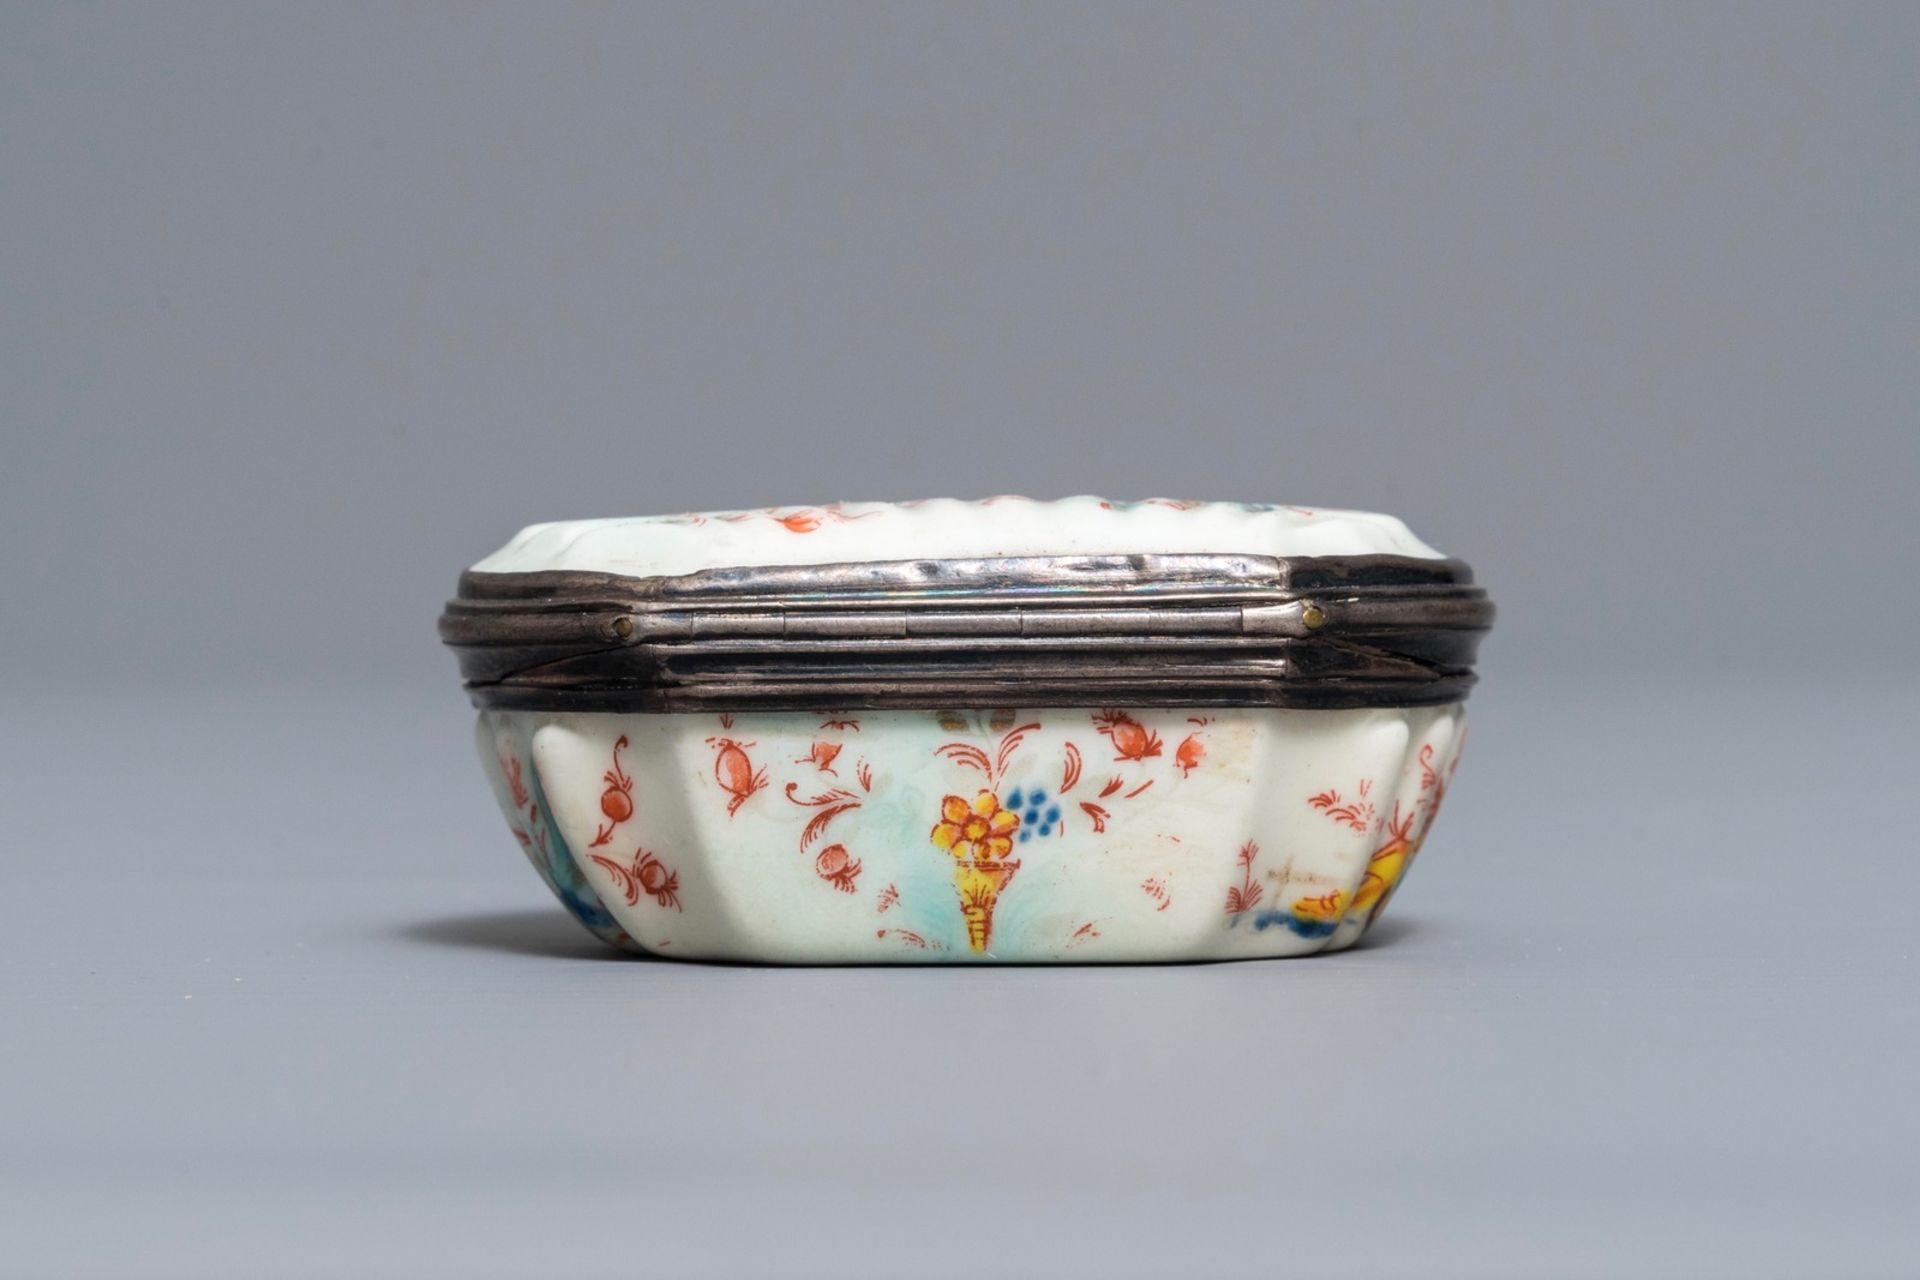 A Kakiemon-style Saint-Cloud porcelain silver-mounted snuff box, France, 2nd quarter 18th C. - Image 5 of 10